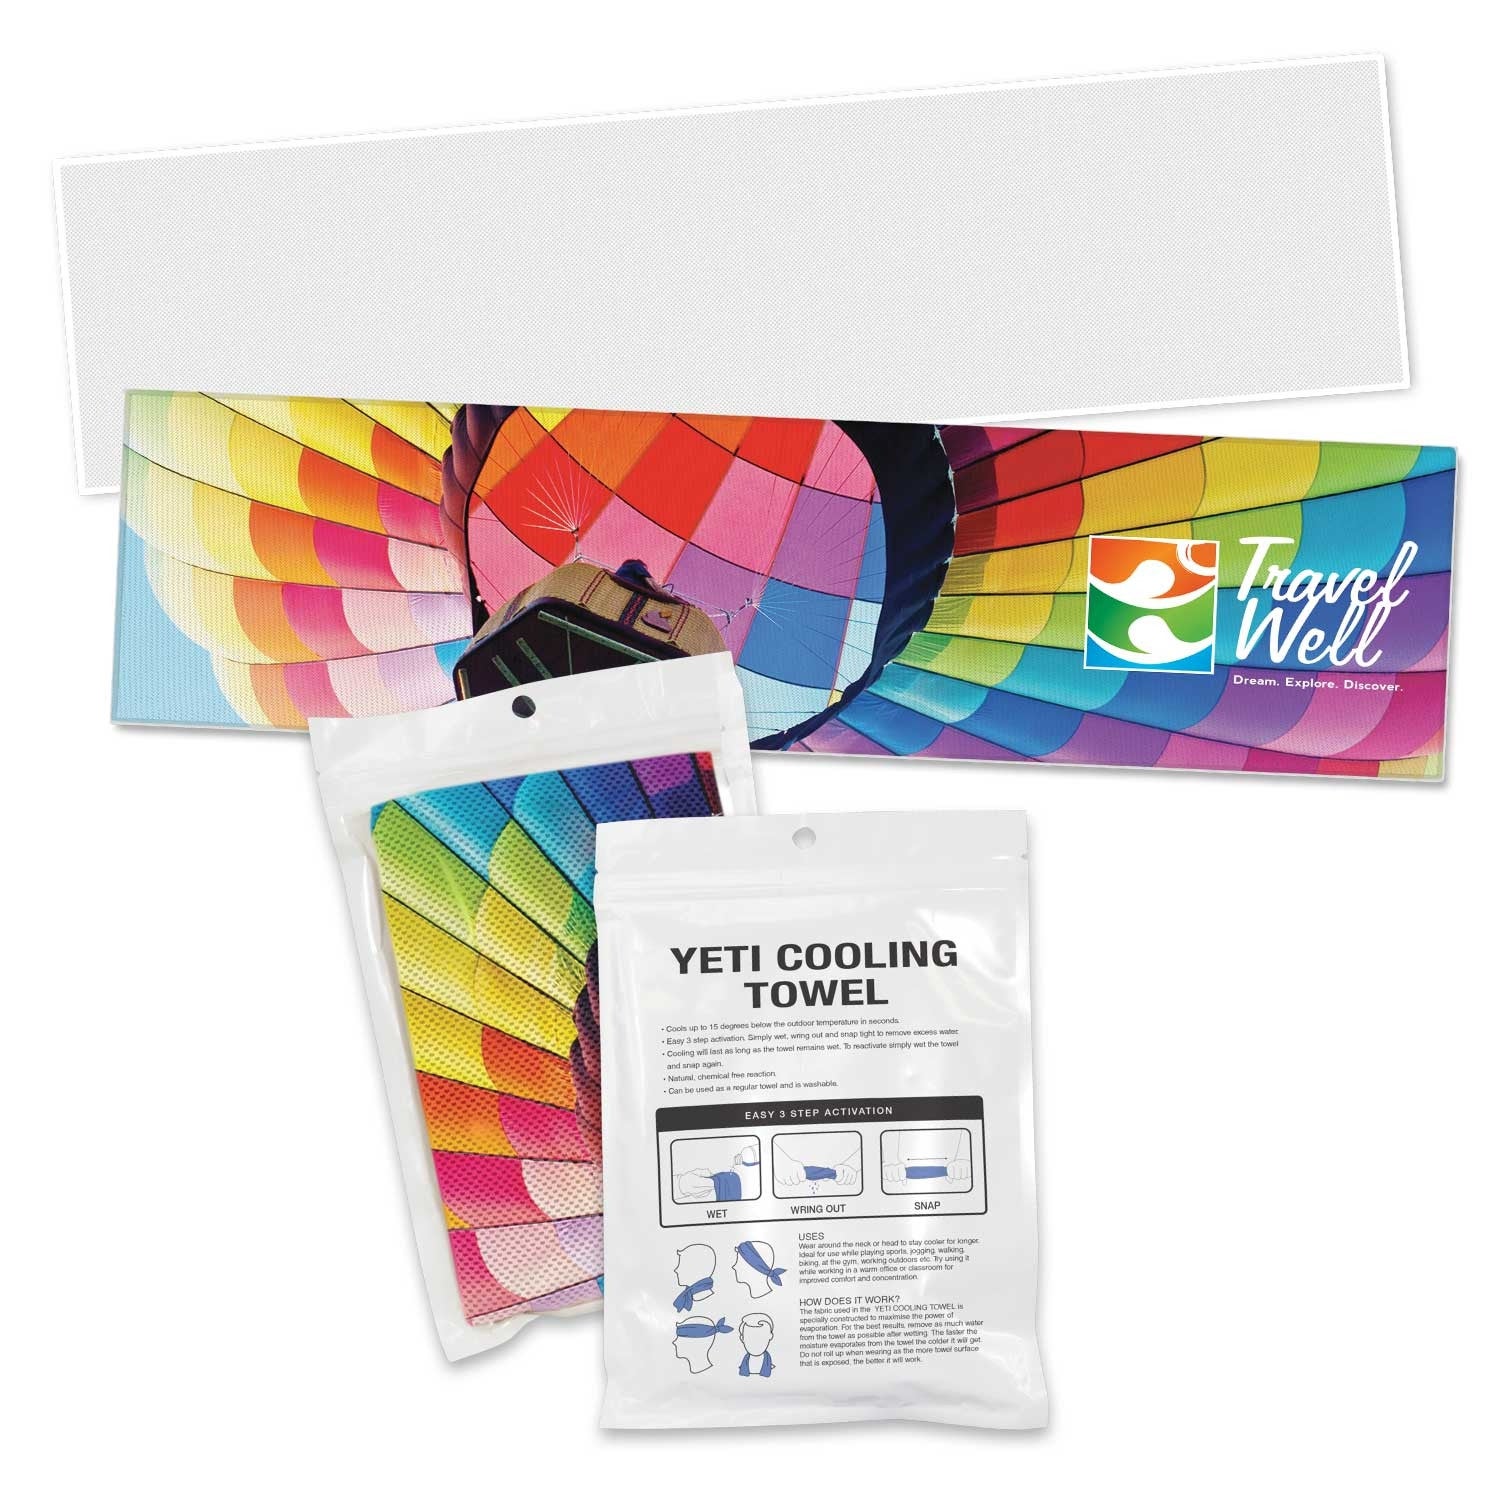 Yeti Premium Cooling Towel - Full Colour - Pouch